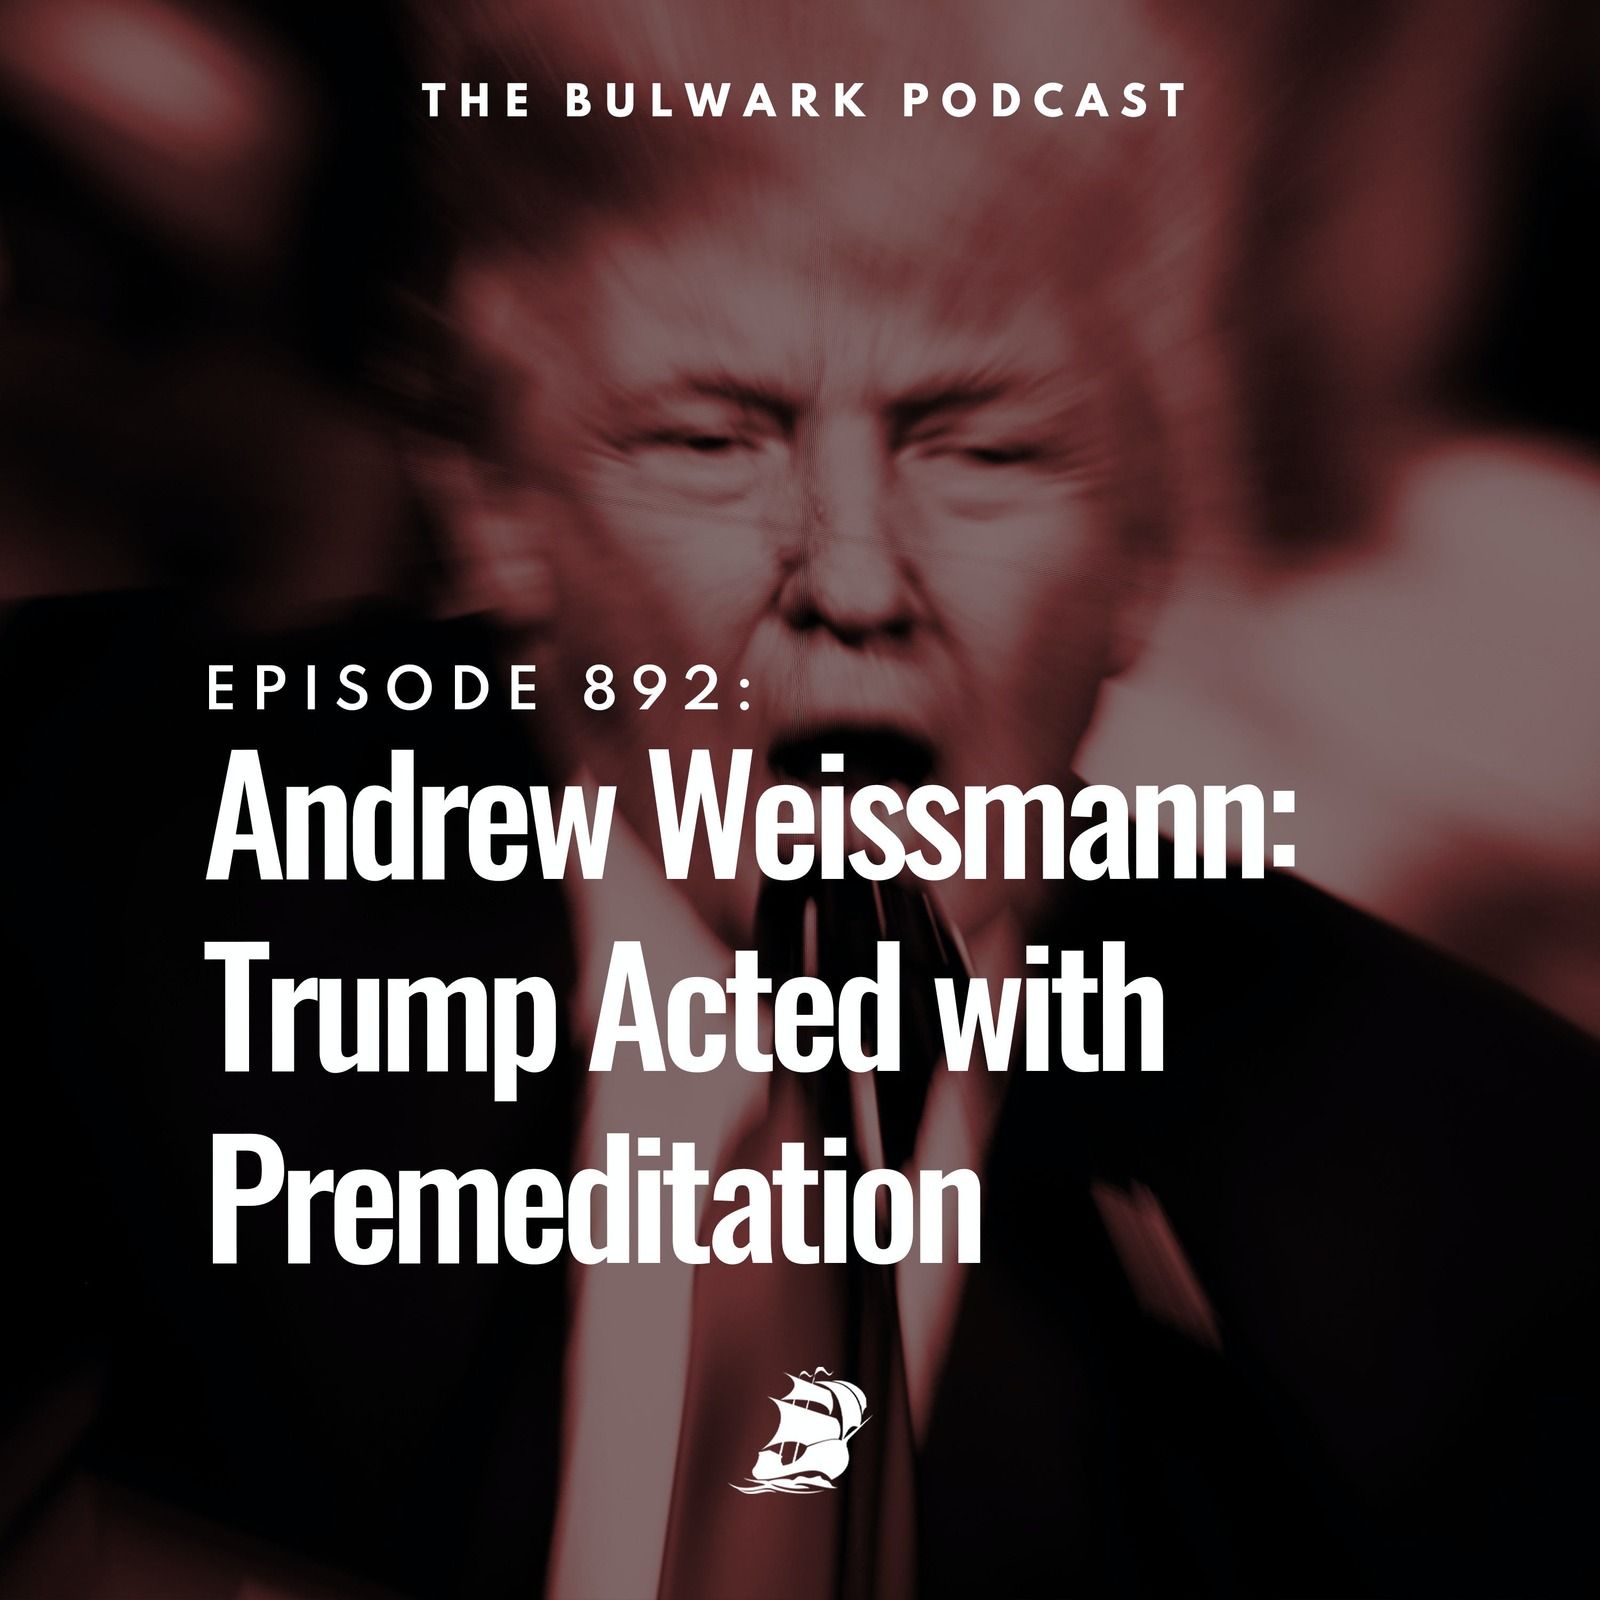 Andrew Weissmann: Trump Acted with Premeditation by The Bulwark Podcast